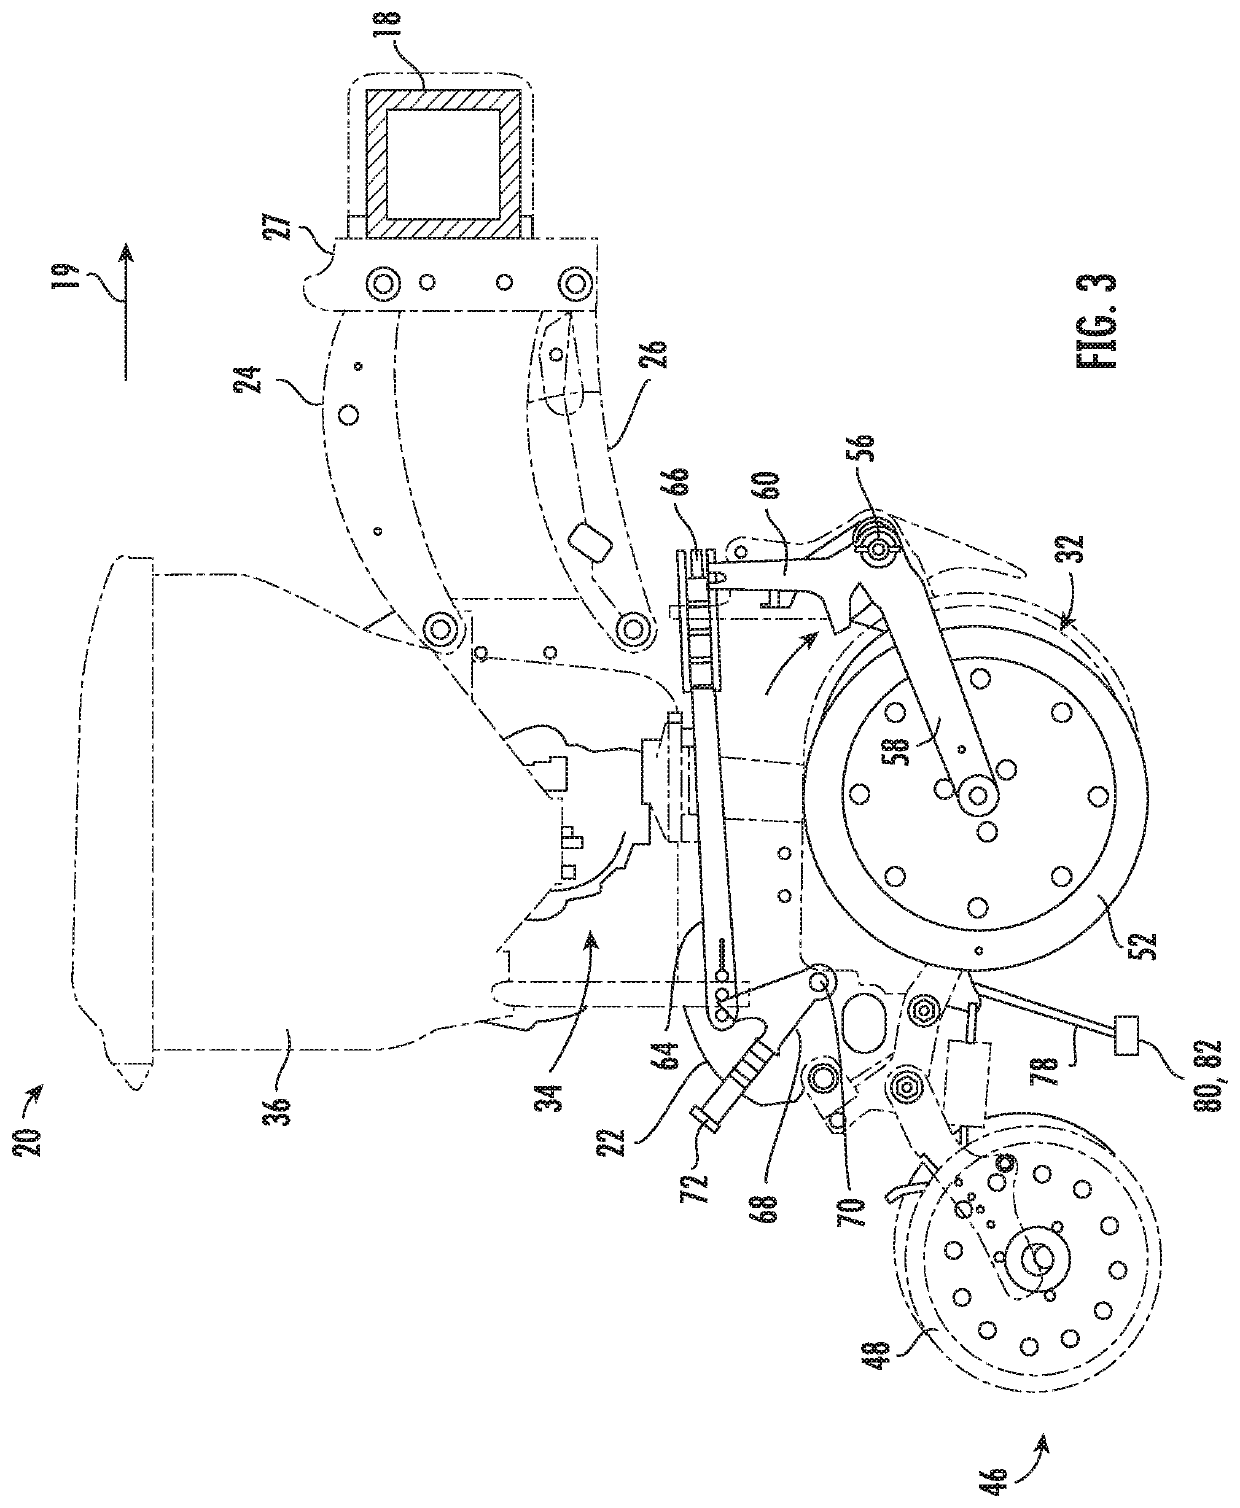 System and related methods for adjusting a down force applied to a row unit of an agricultural implement